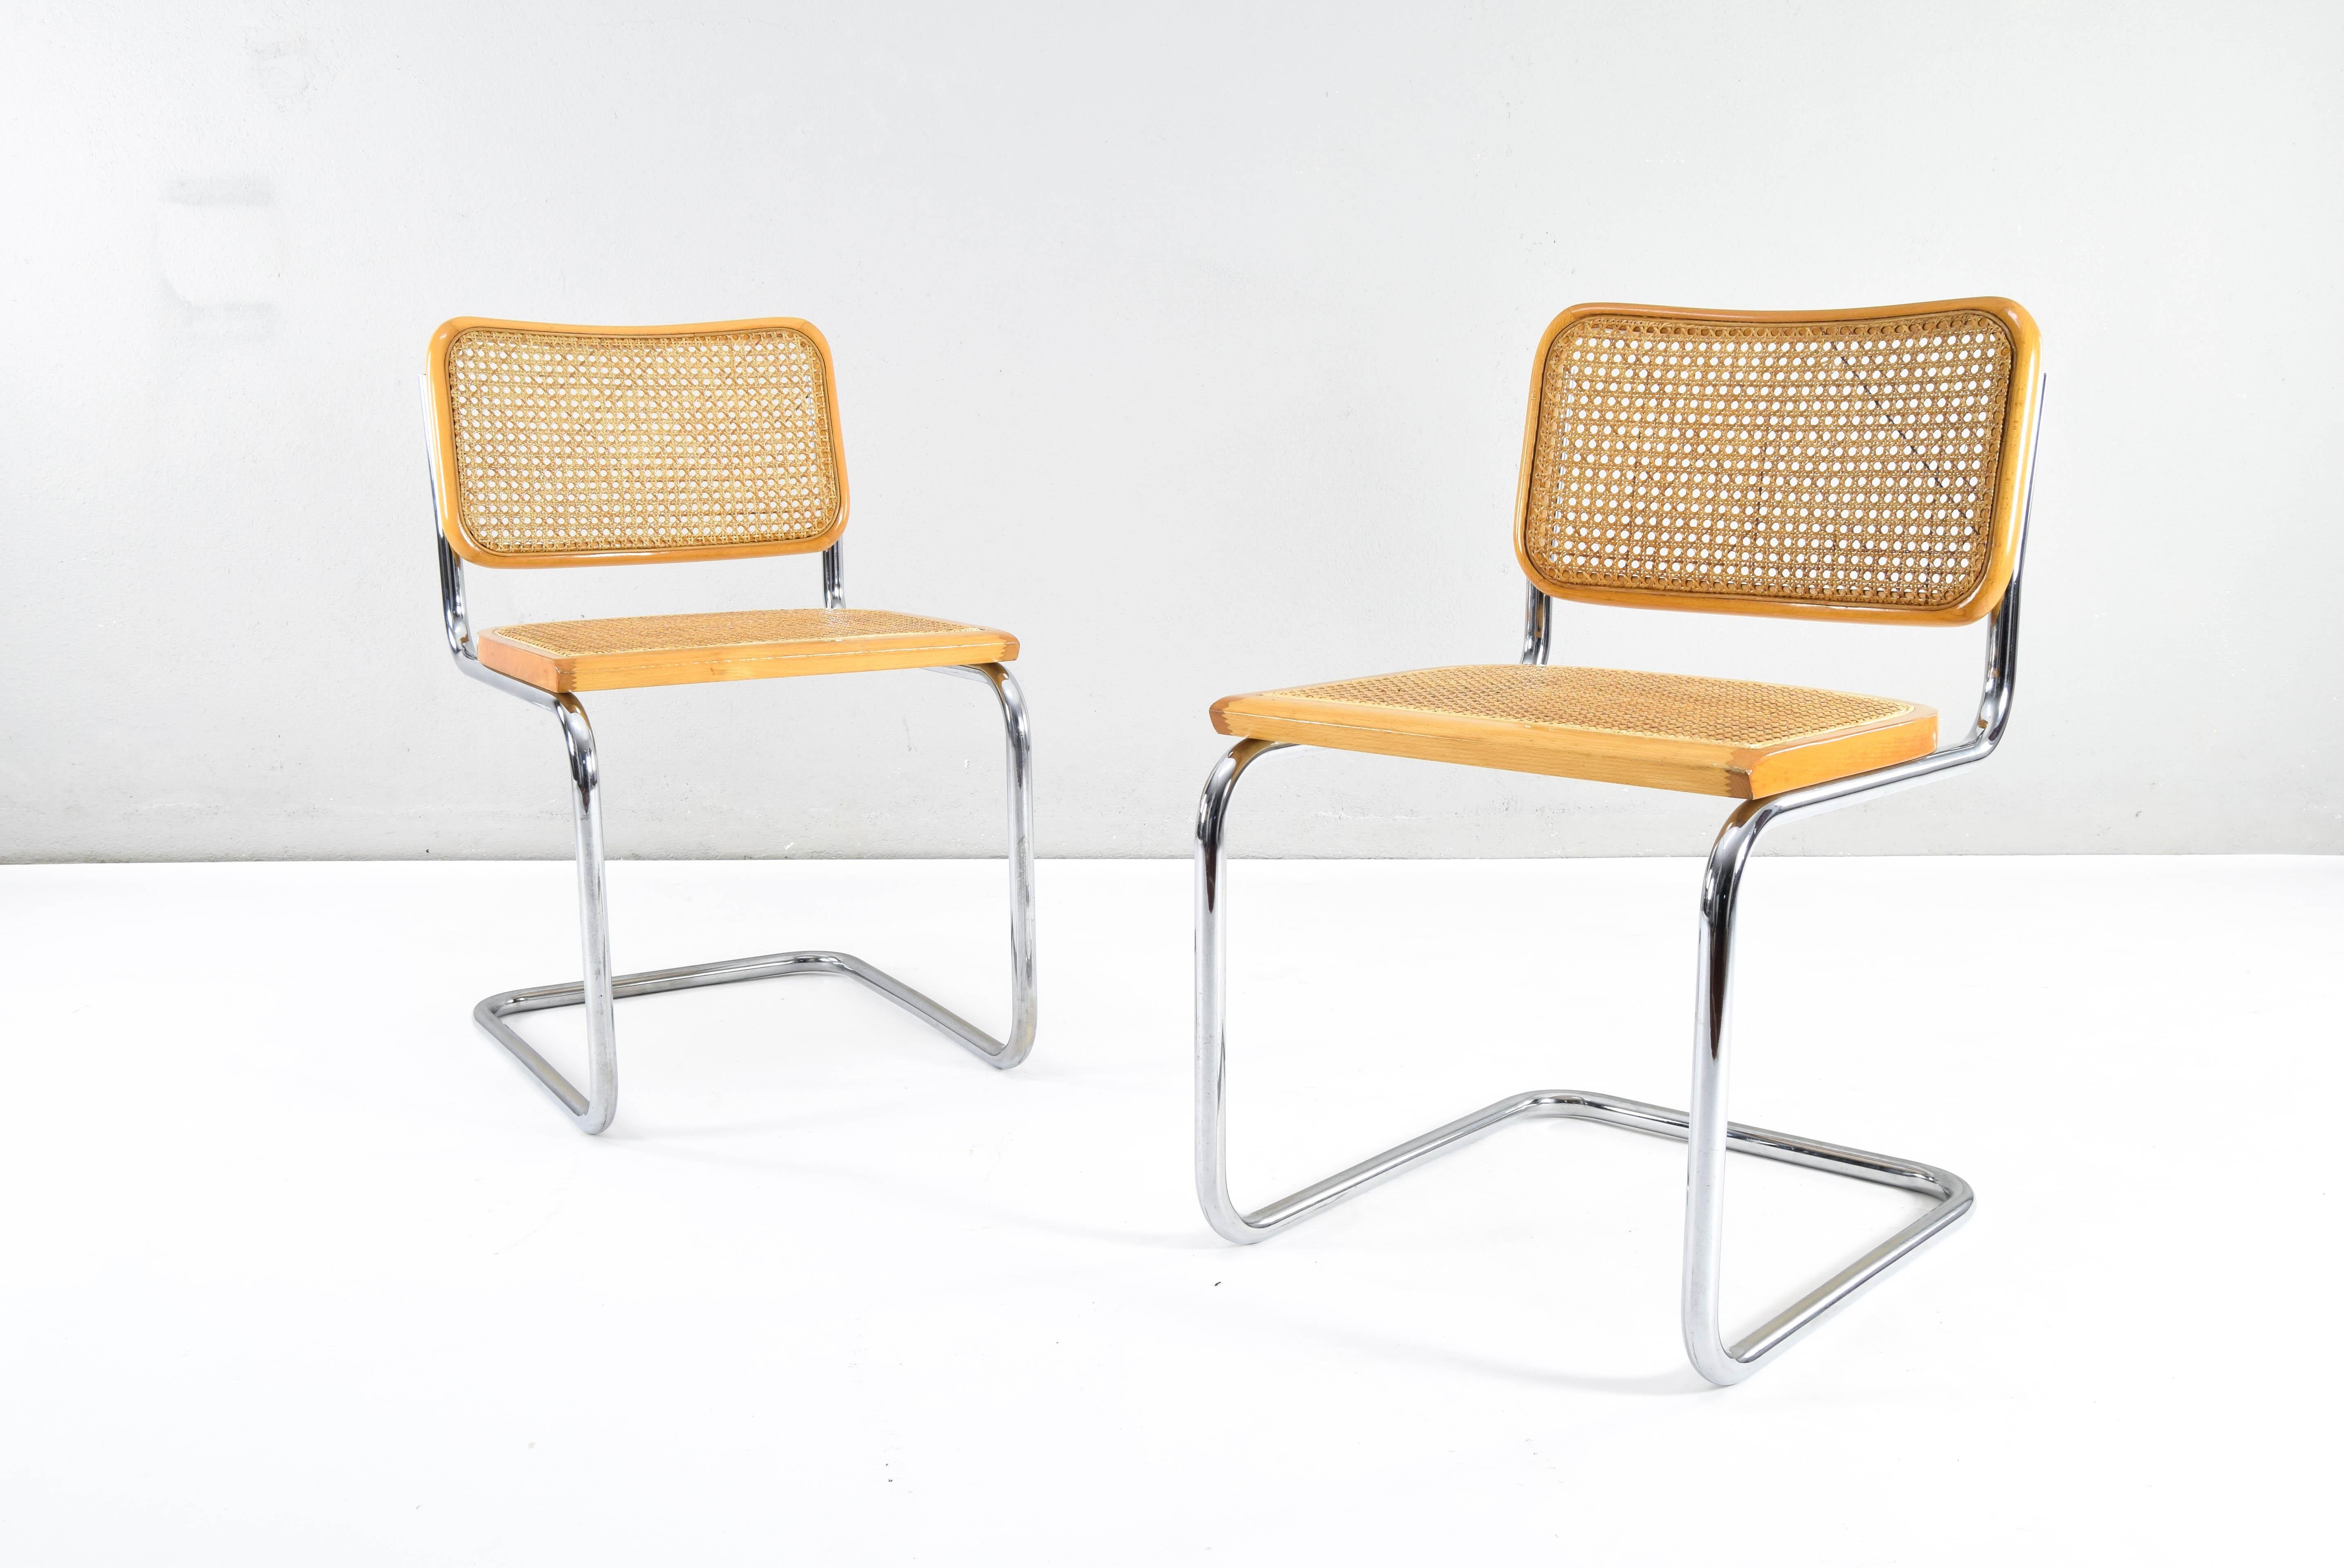 Late 20th Century Set of Two Mid-Century Modern Marcel Breuer B32 Blonde Cesca Chairs, Italy 1970s For Sale